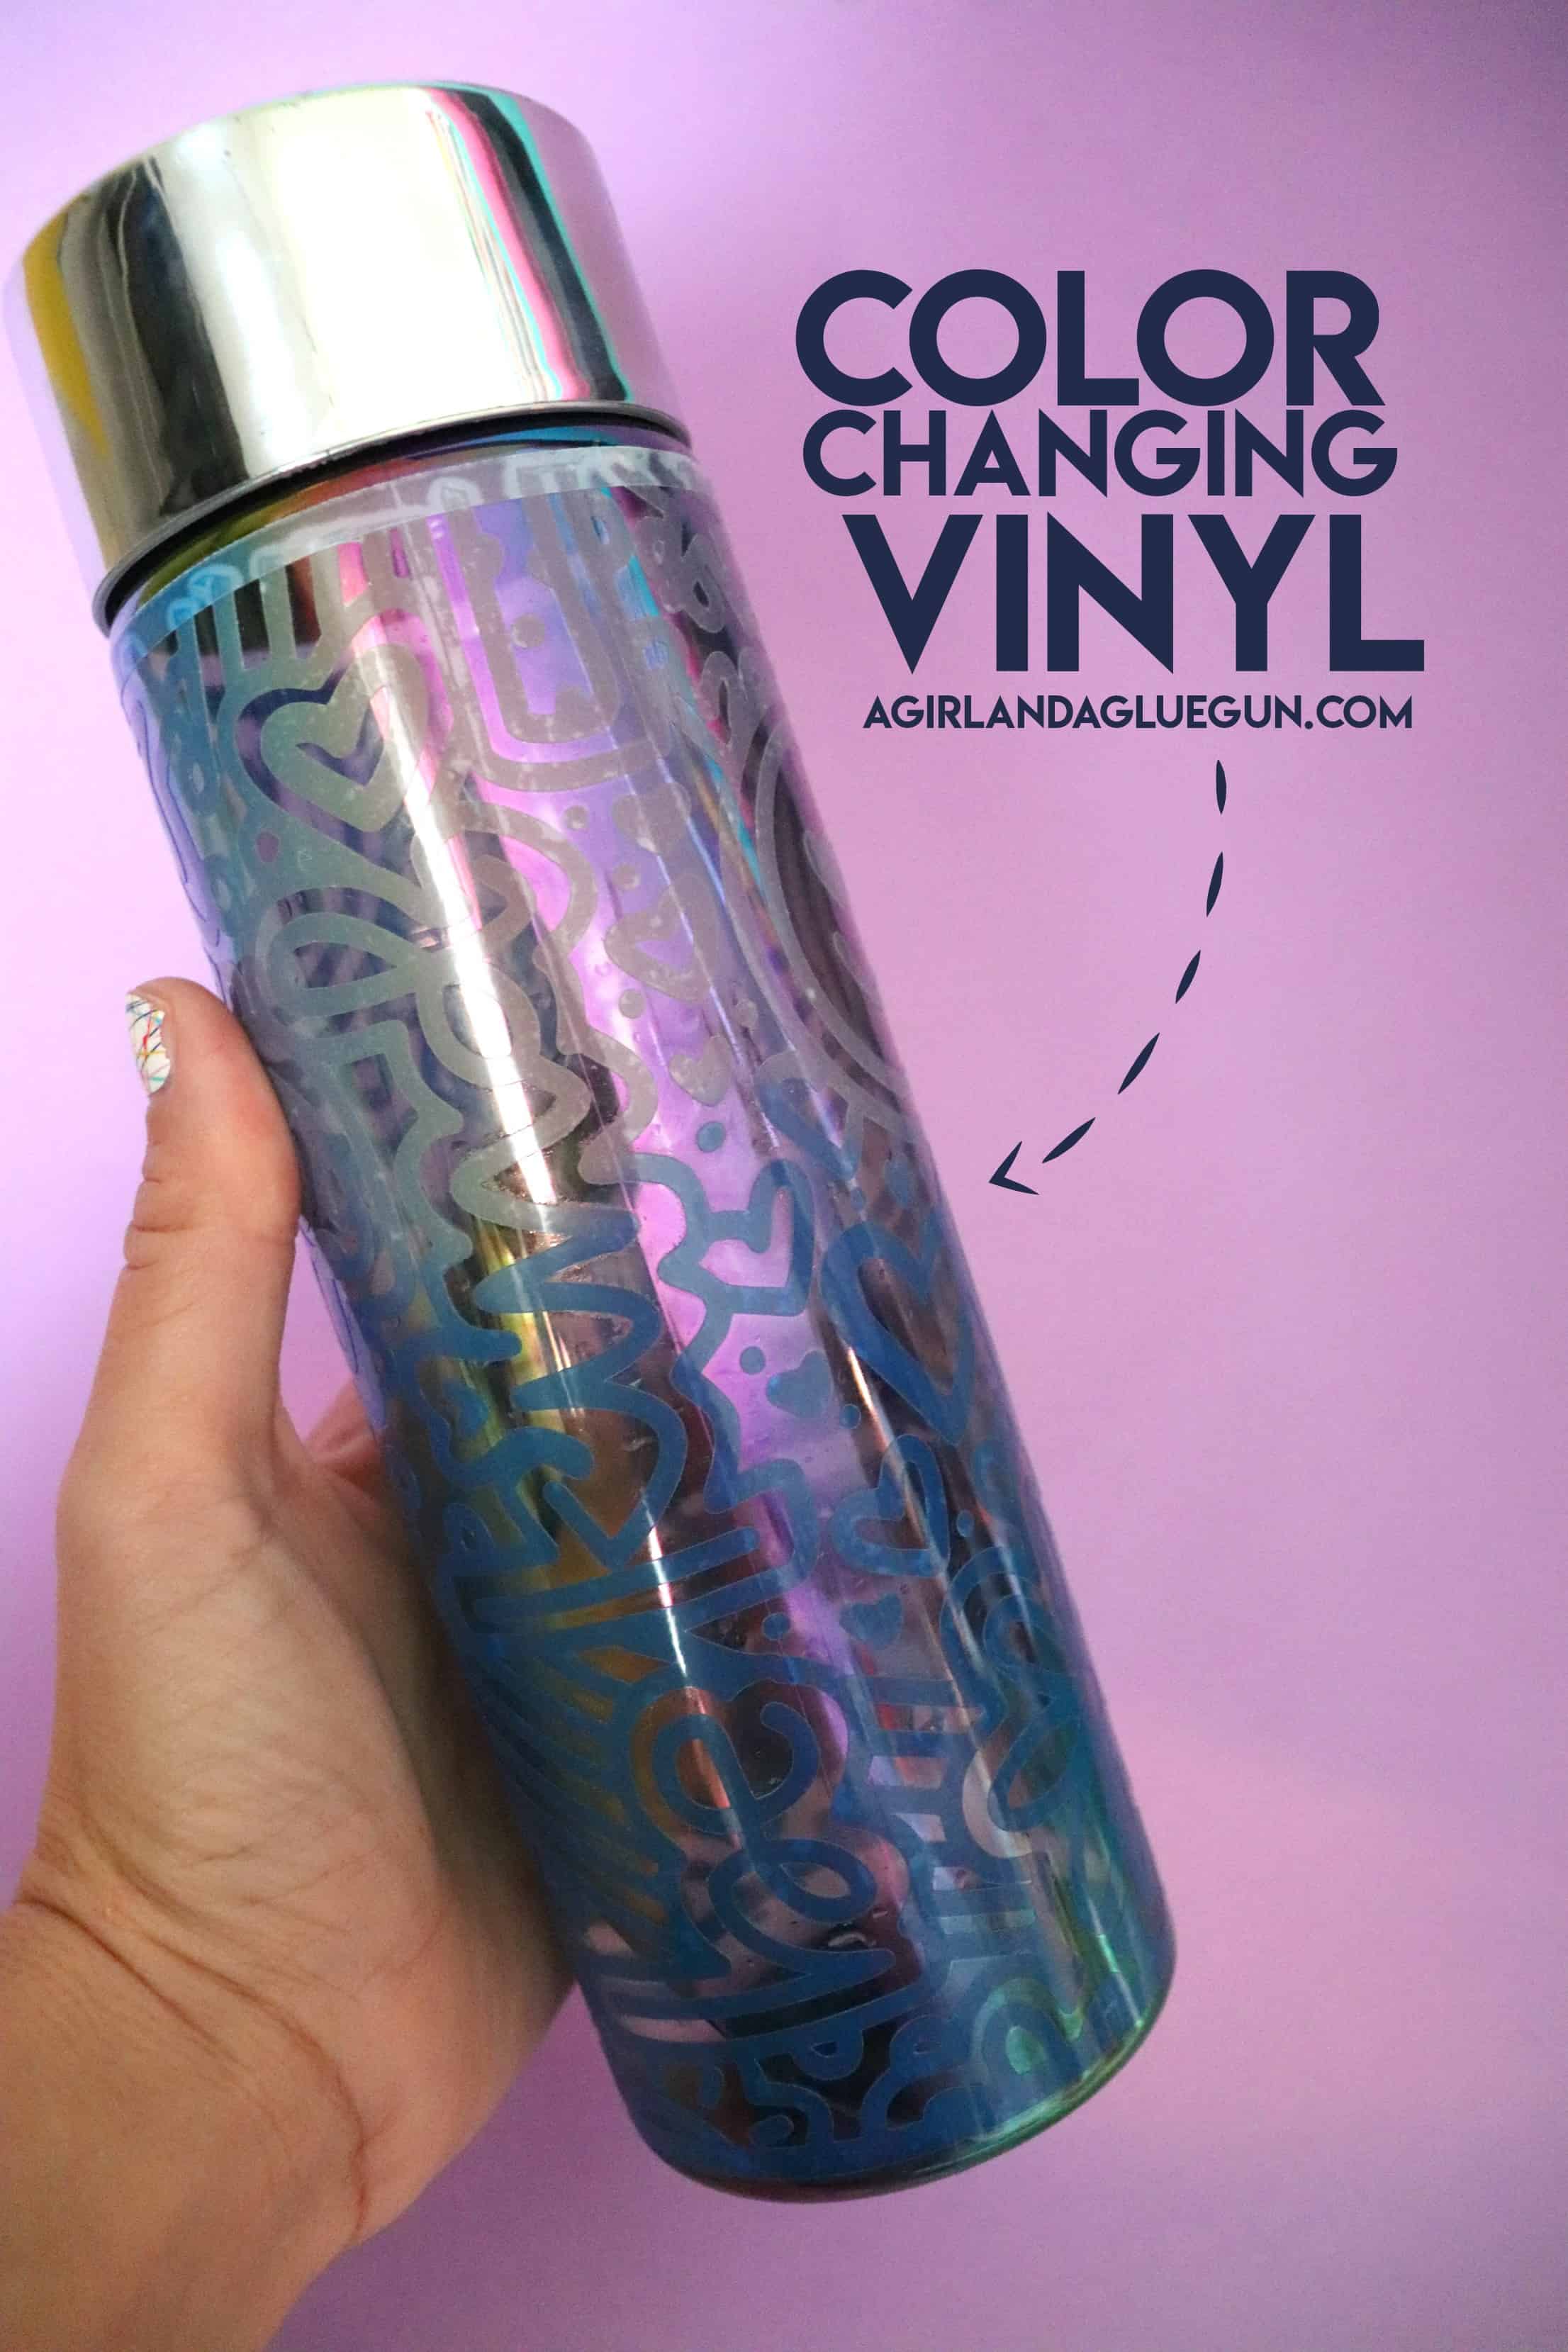 Color Changing Vinyl - A girl and a glue gun